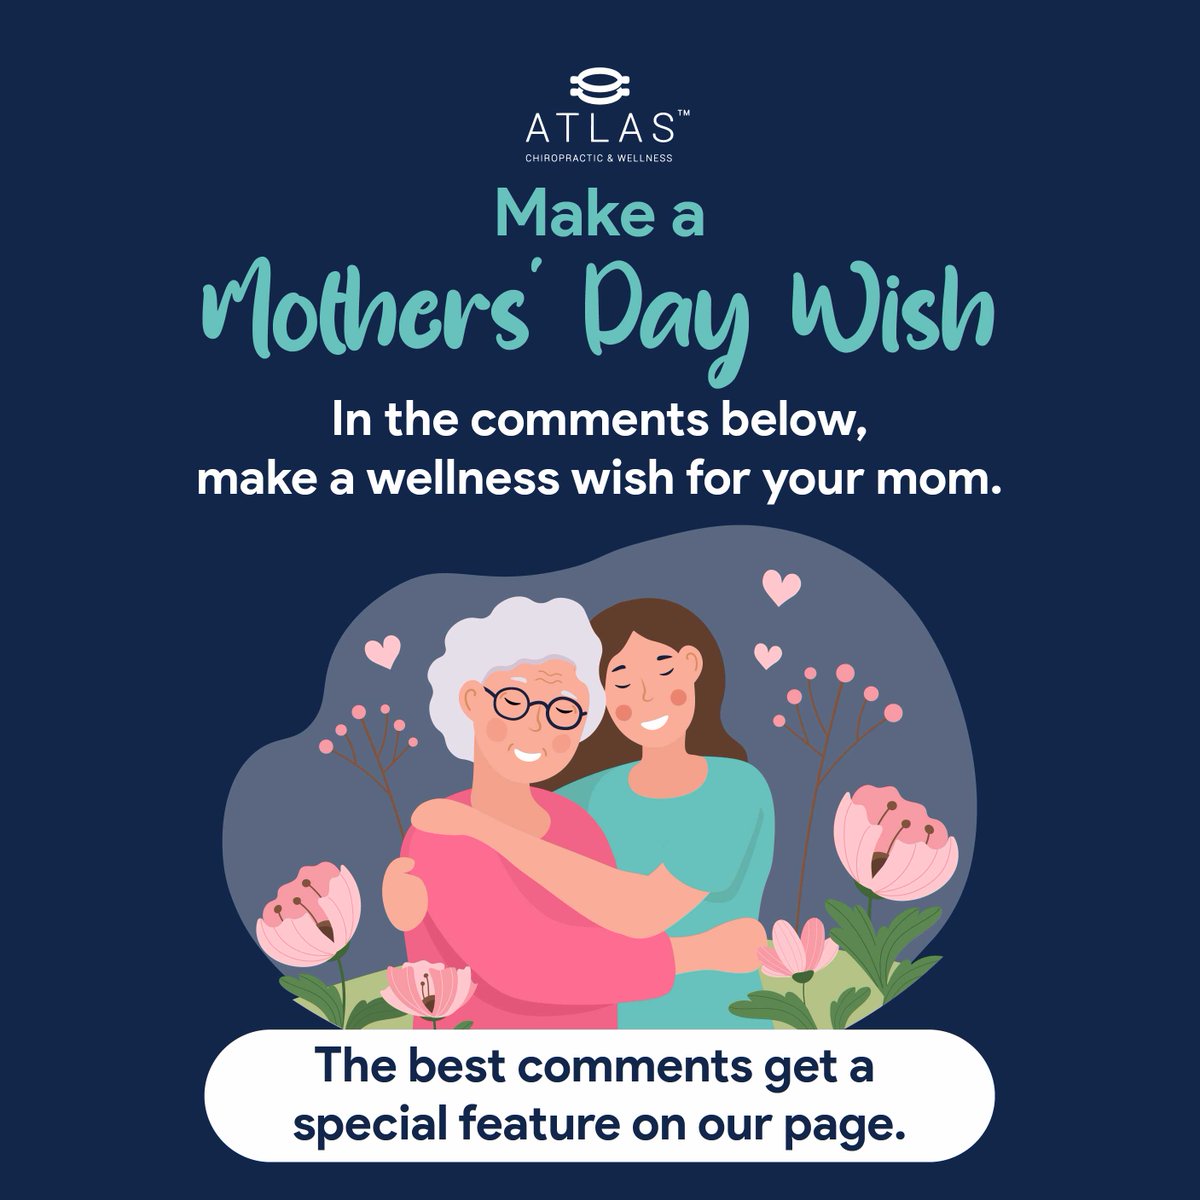 Make a wellness wish for mom. Don't forget to tag her!! To all the wonderful moms out there, thank you for everything you do. Happy Mother's Day! 

#momlife #supermom #mothersdaywishes #wellnessmom #ChiropracticCare #momshealth